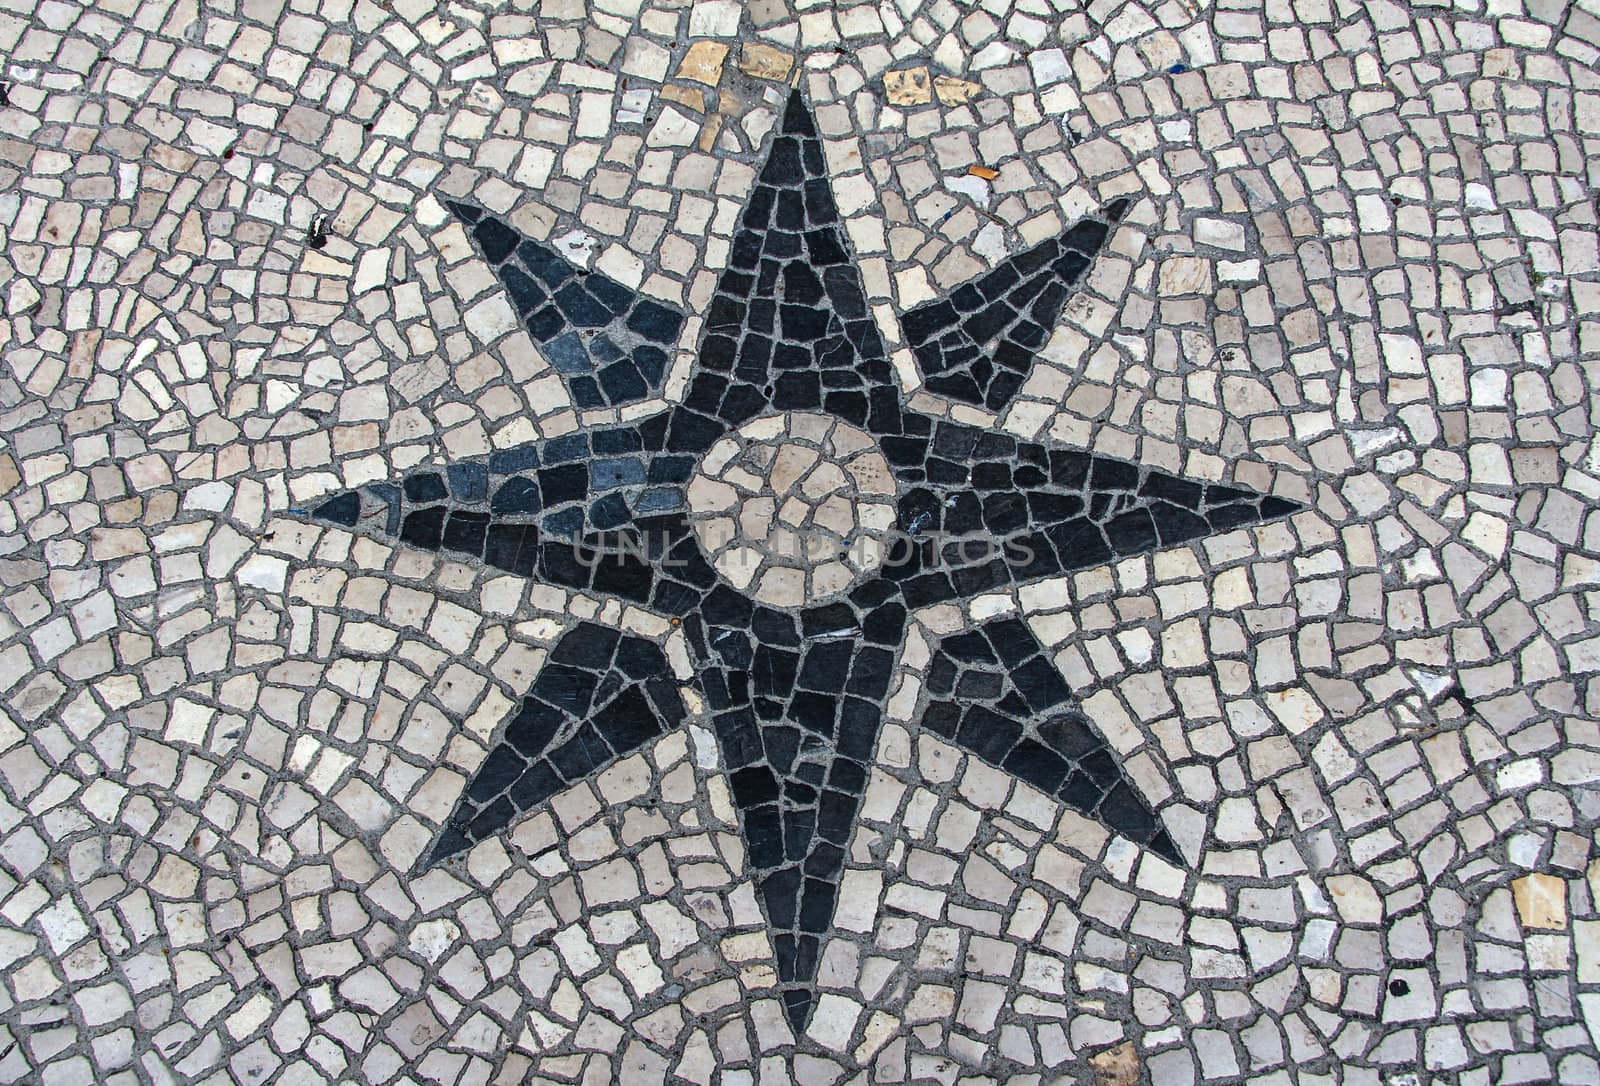 Clear stone blocks pavement texture with a dark central star motive for background